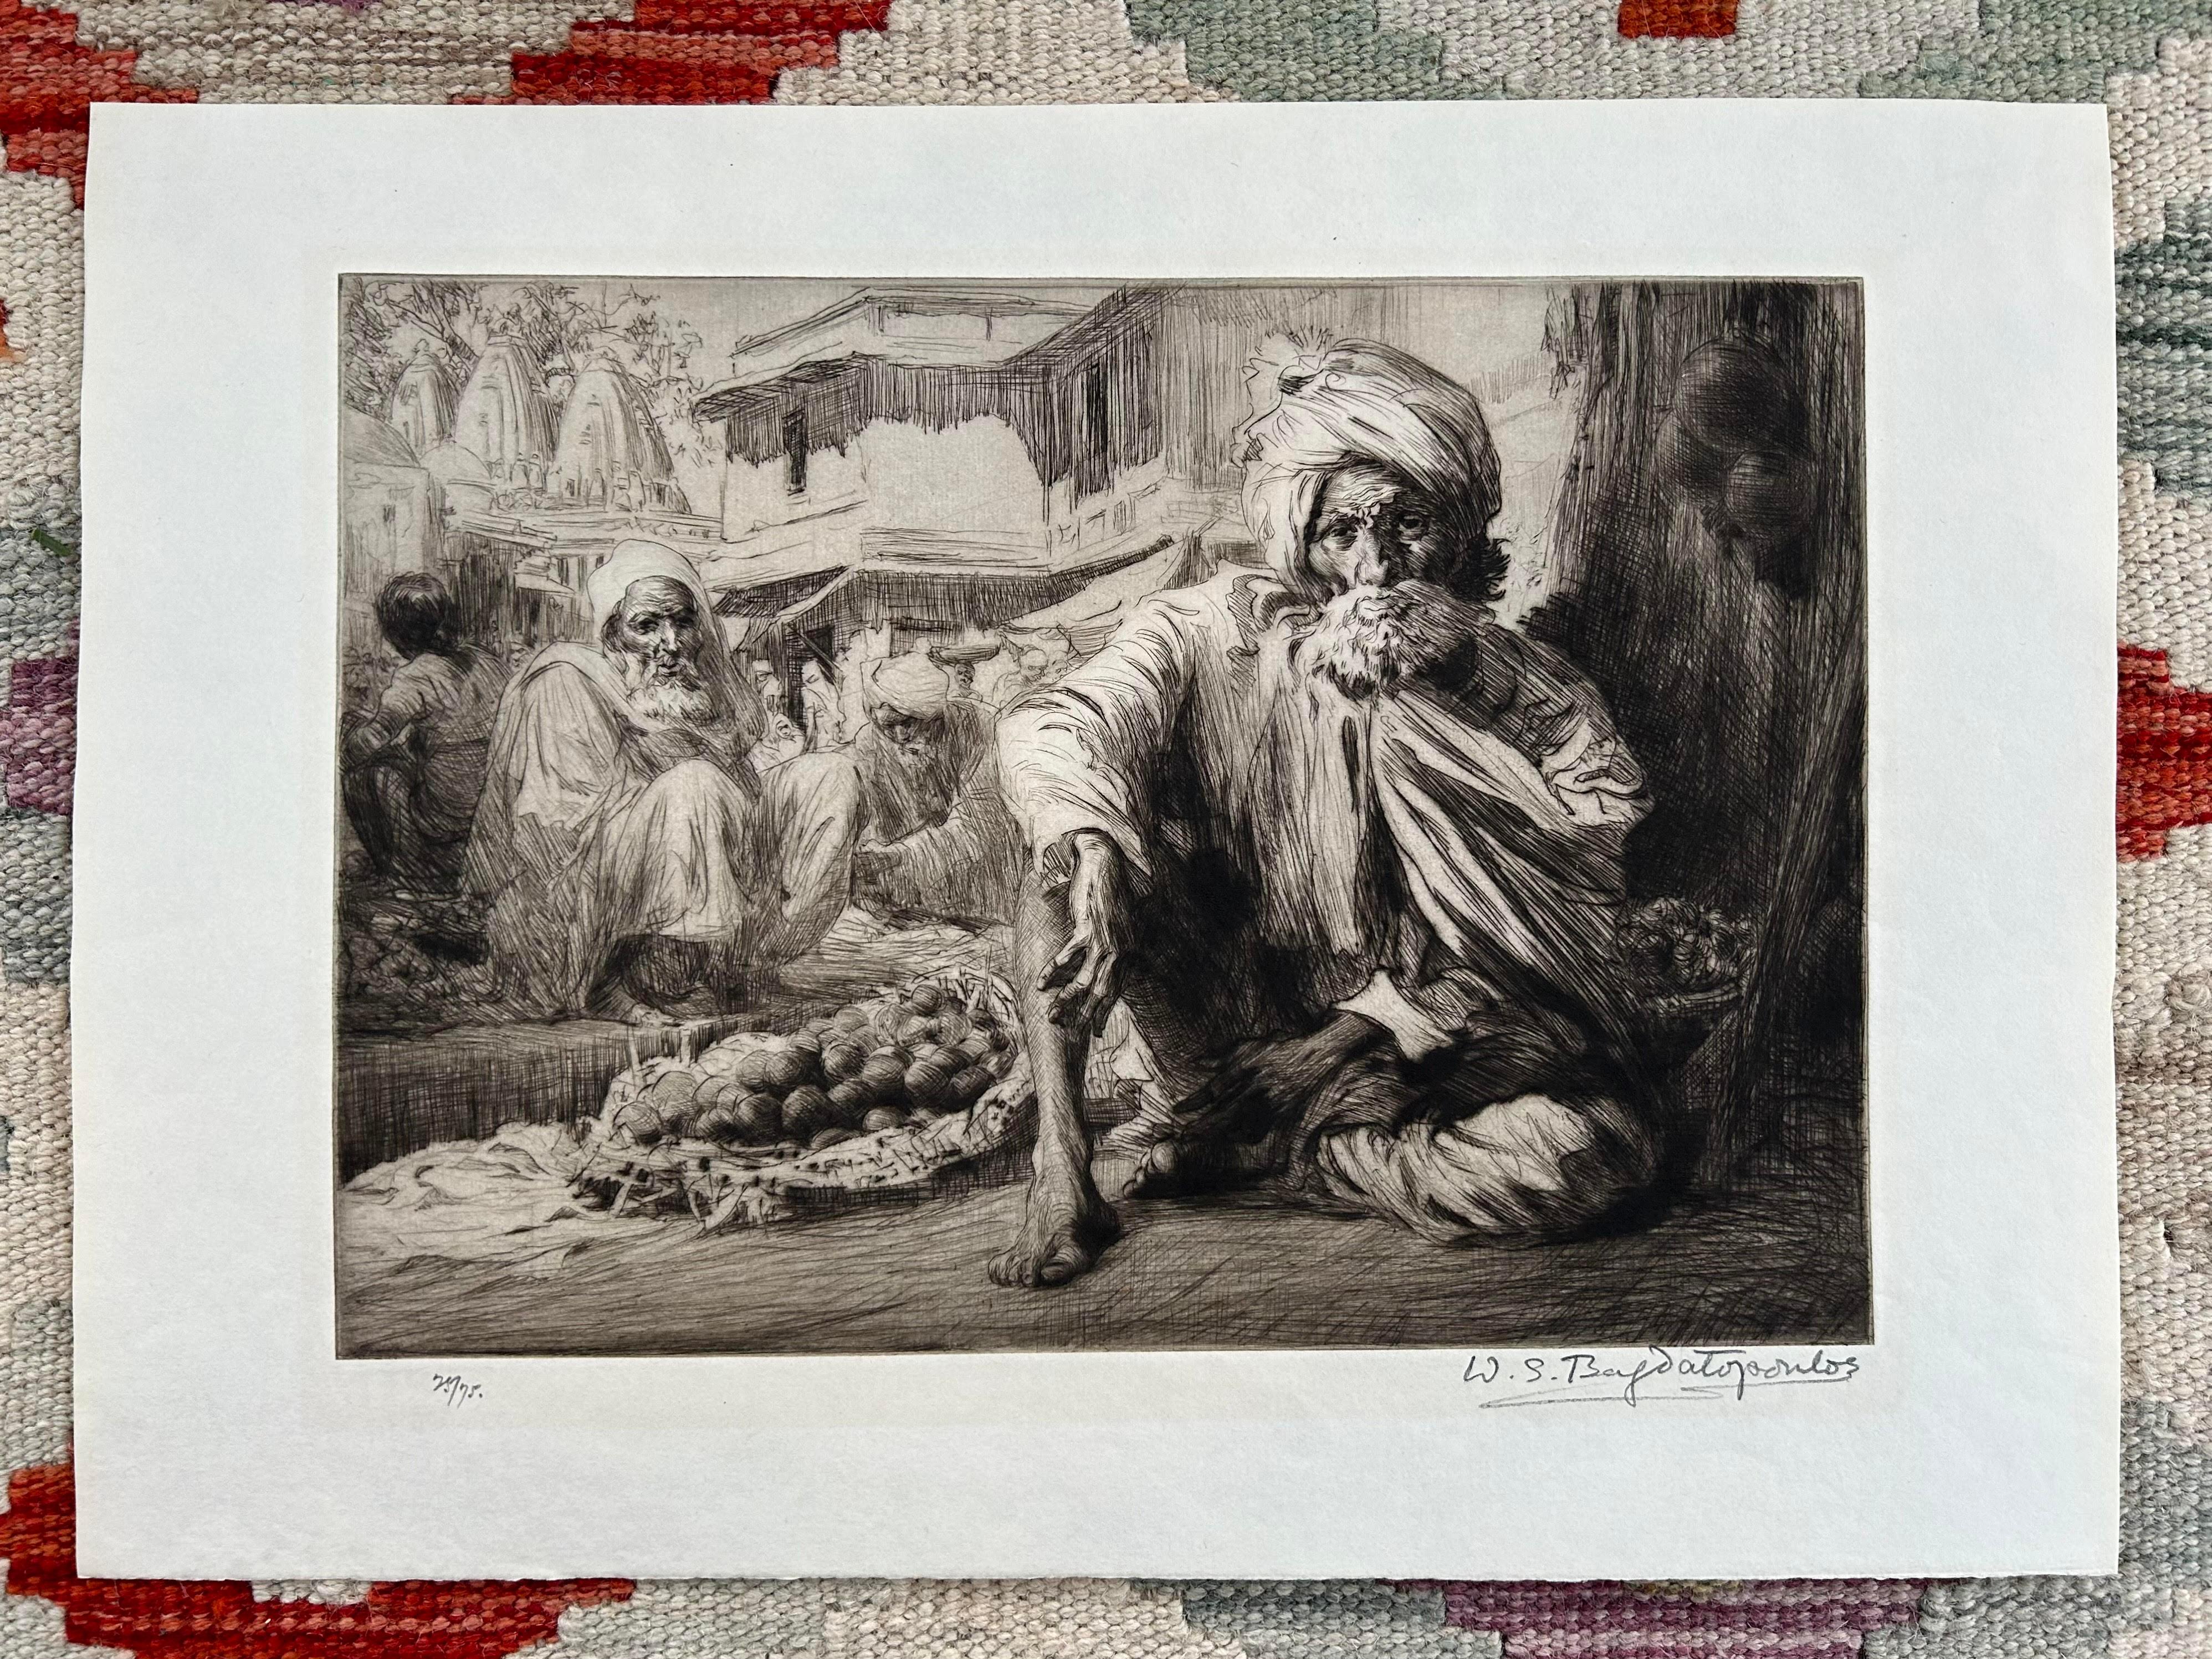 India Rare Edition 25/75 Engraving In the Bazaar Bijapur 1929 W Bagdatopolus - Print by Unknown